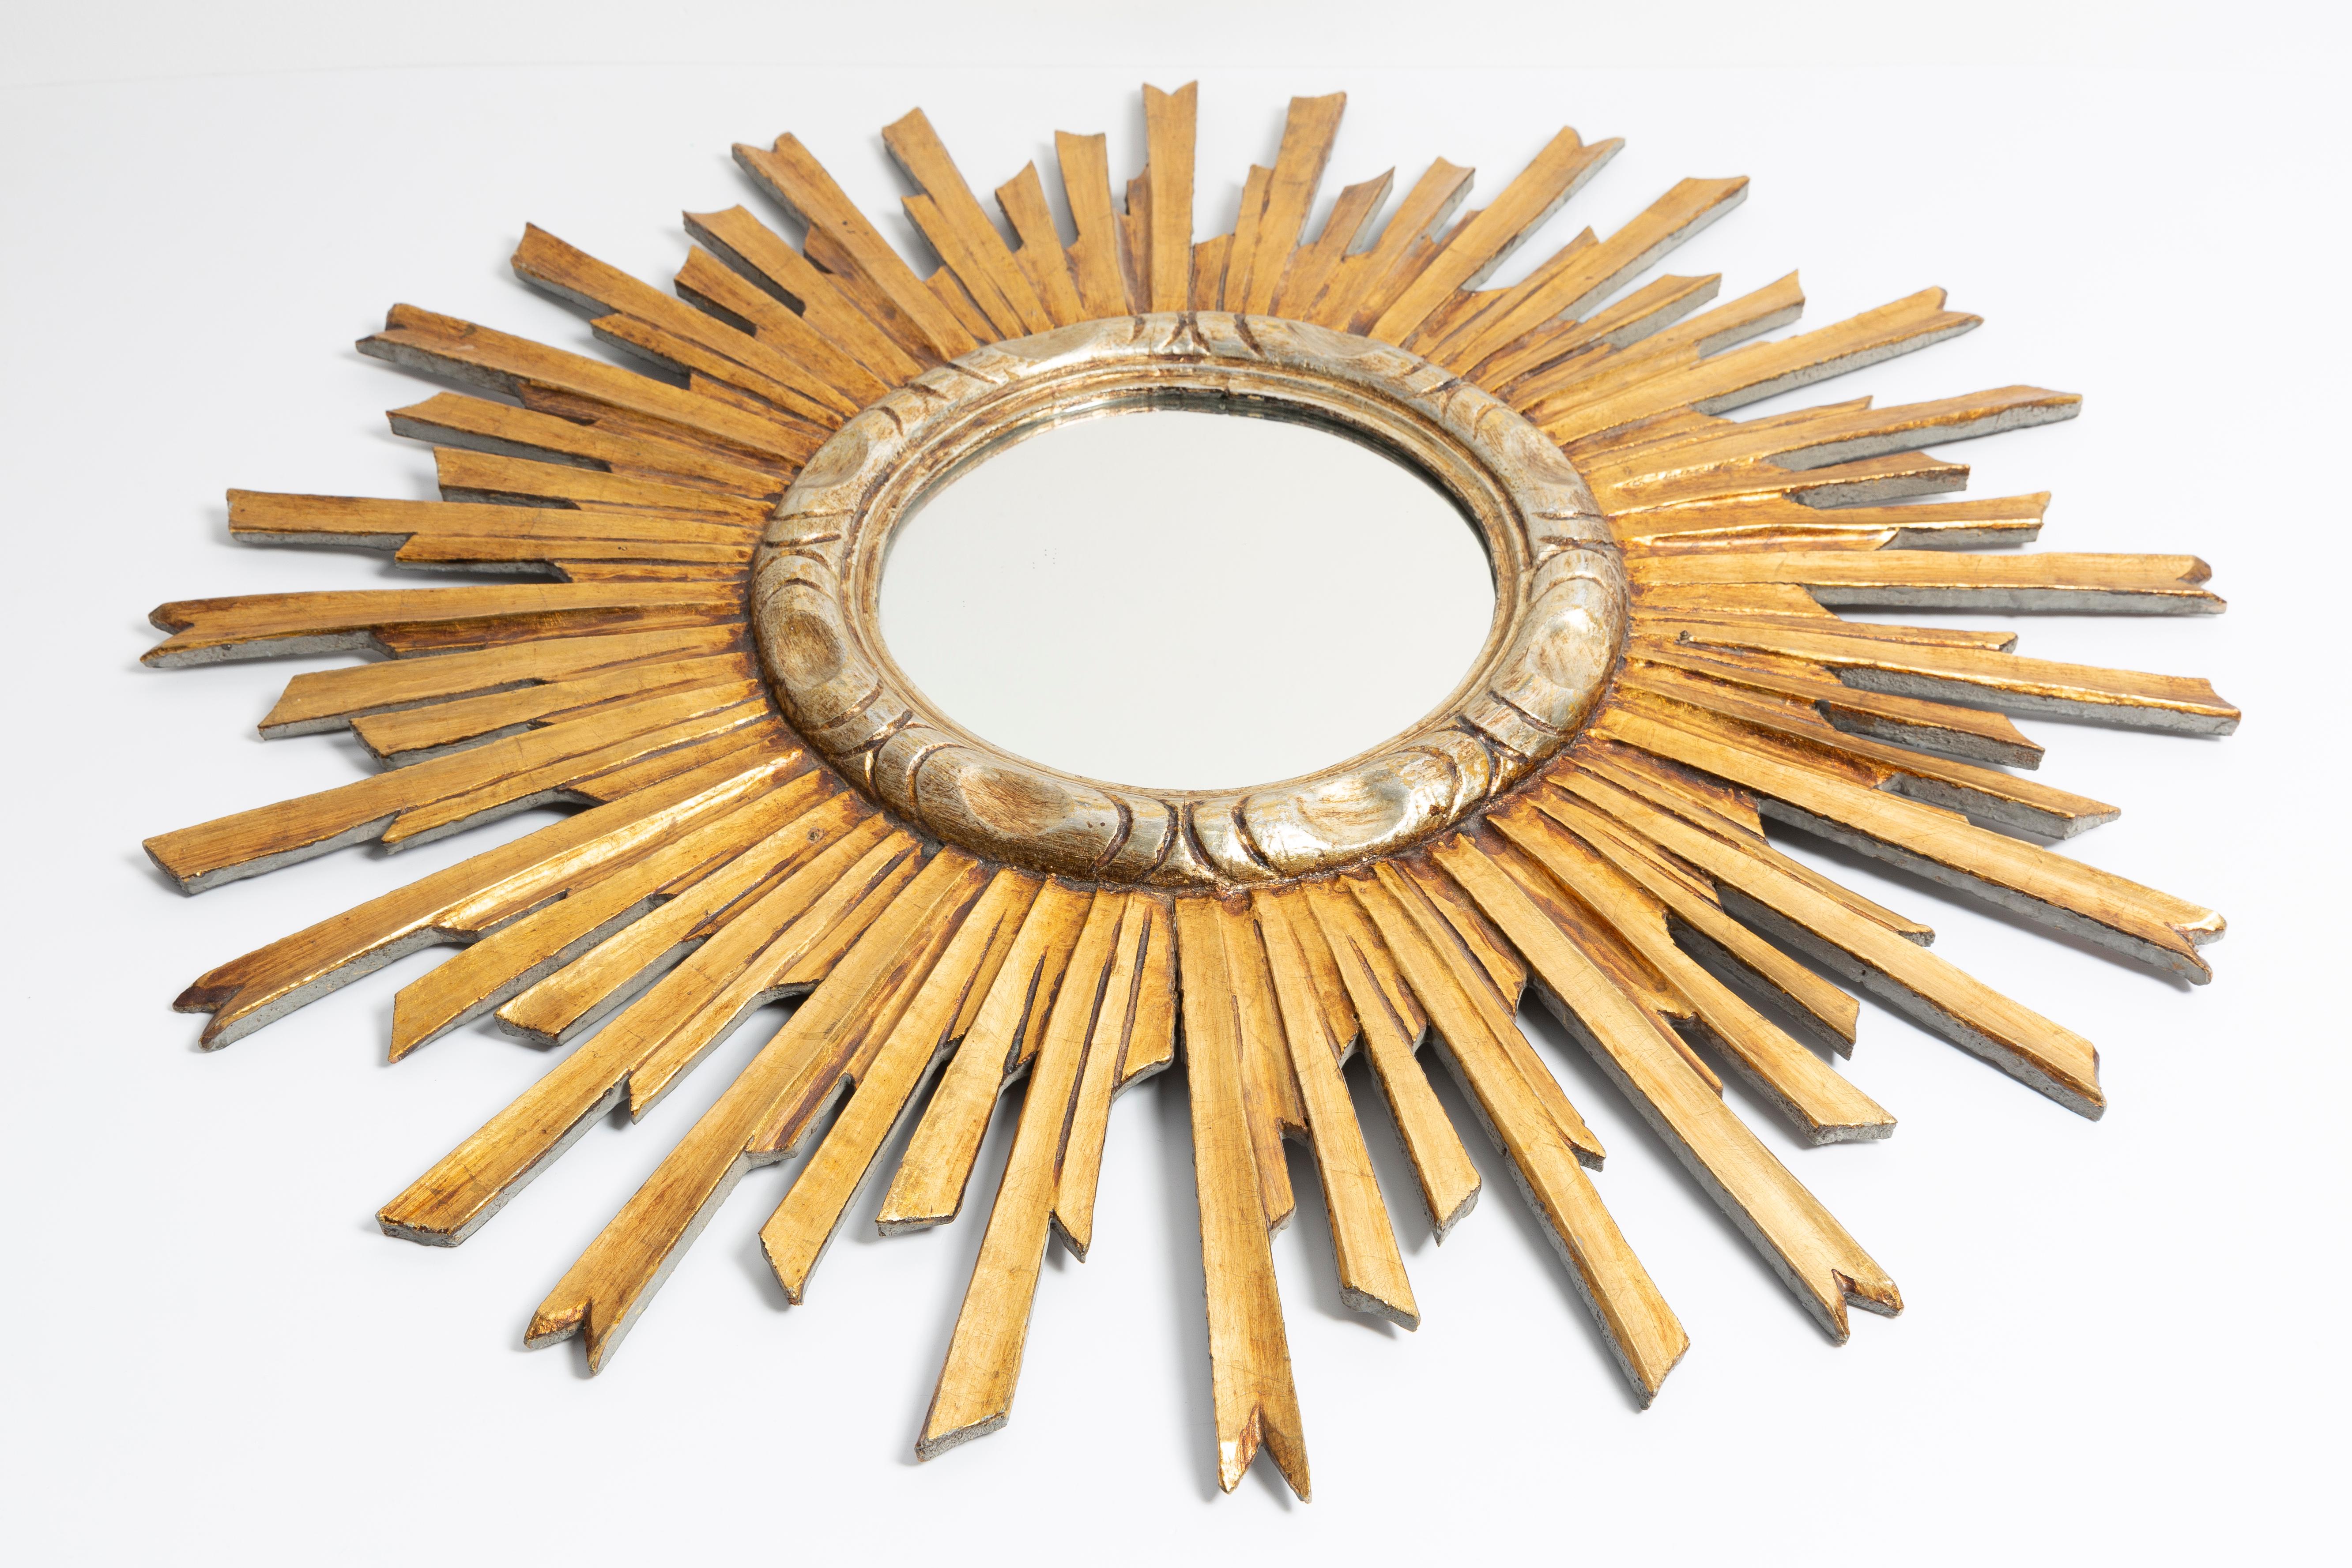 Vintage mirror in a golden decorative sun-shaped frame from Italy. The frame is made of wood. Good original condition, no damage or cracks in the frame, the mirror pane has minimal flaws. Beautiful piece for every interior! Absolutely unique. Only